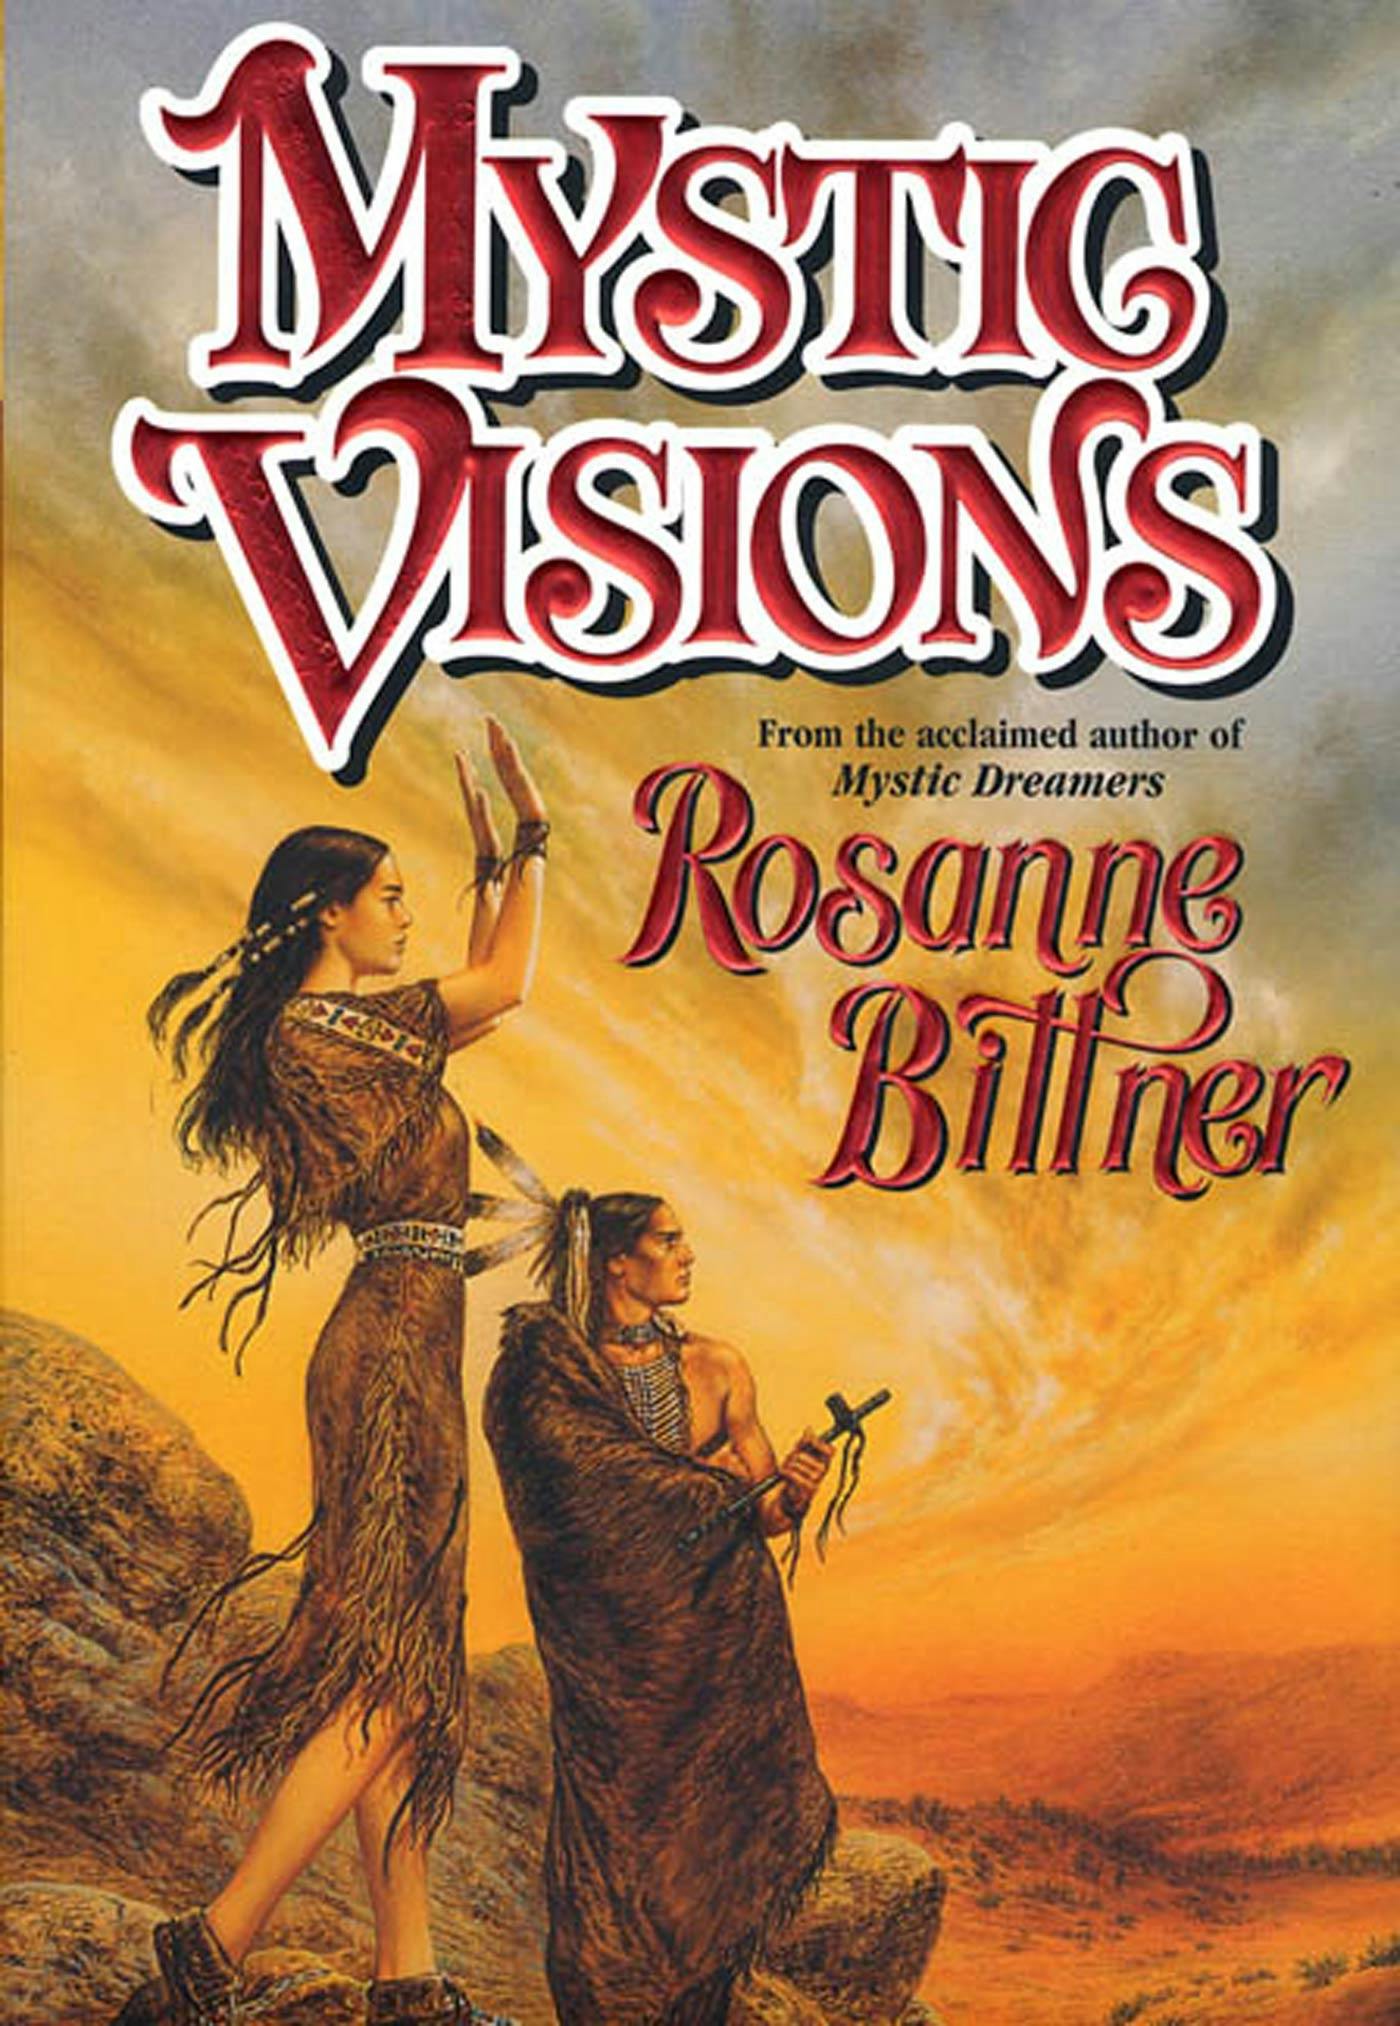 Cover for the book titled as: Mystic Visions